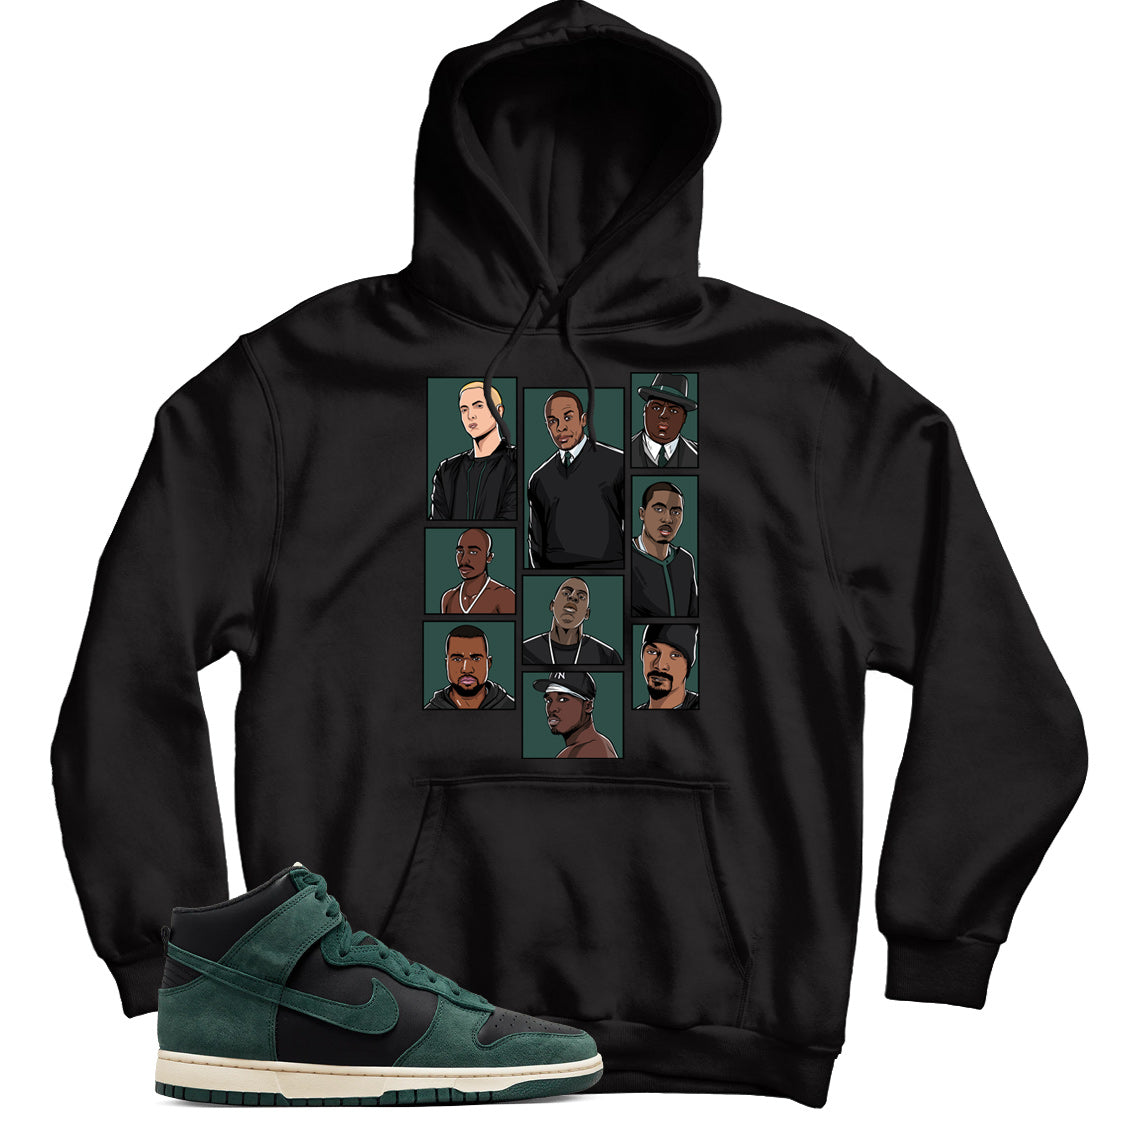 Dunk High Faded Spruce hoodie